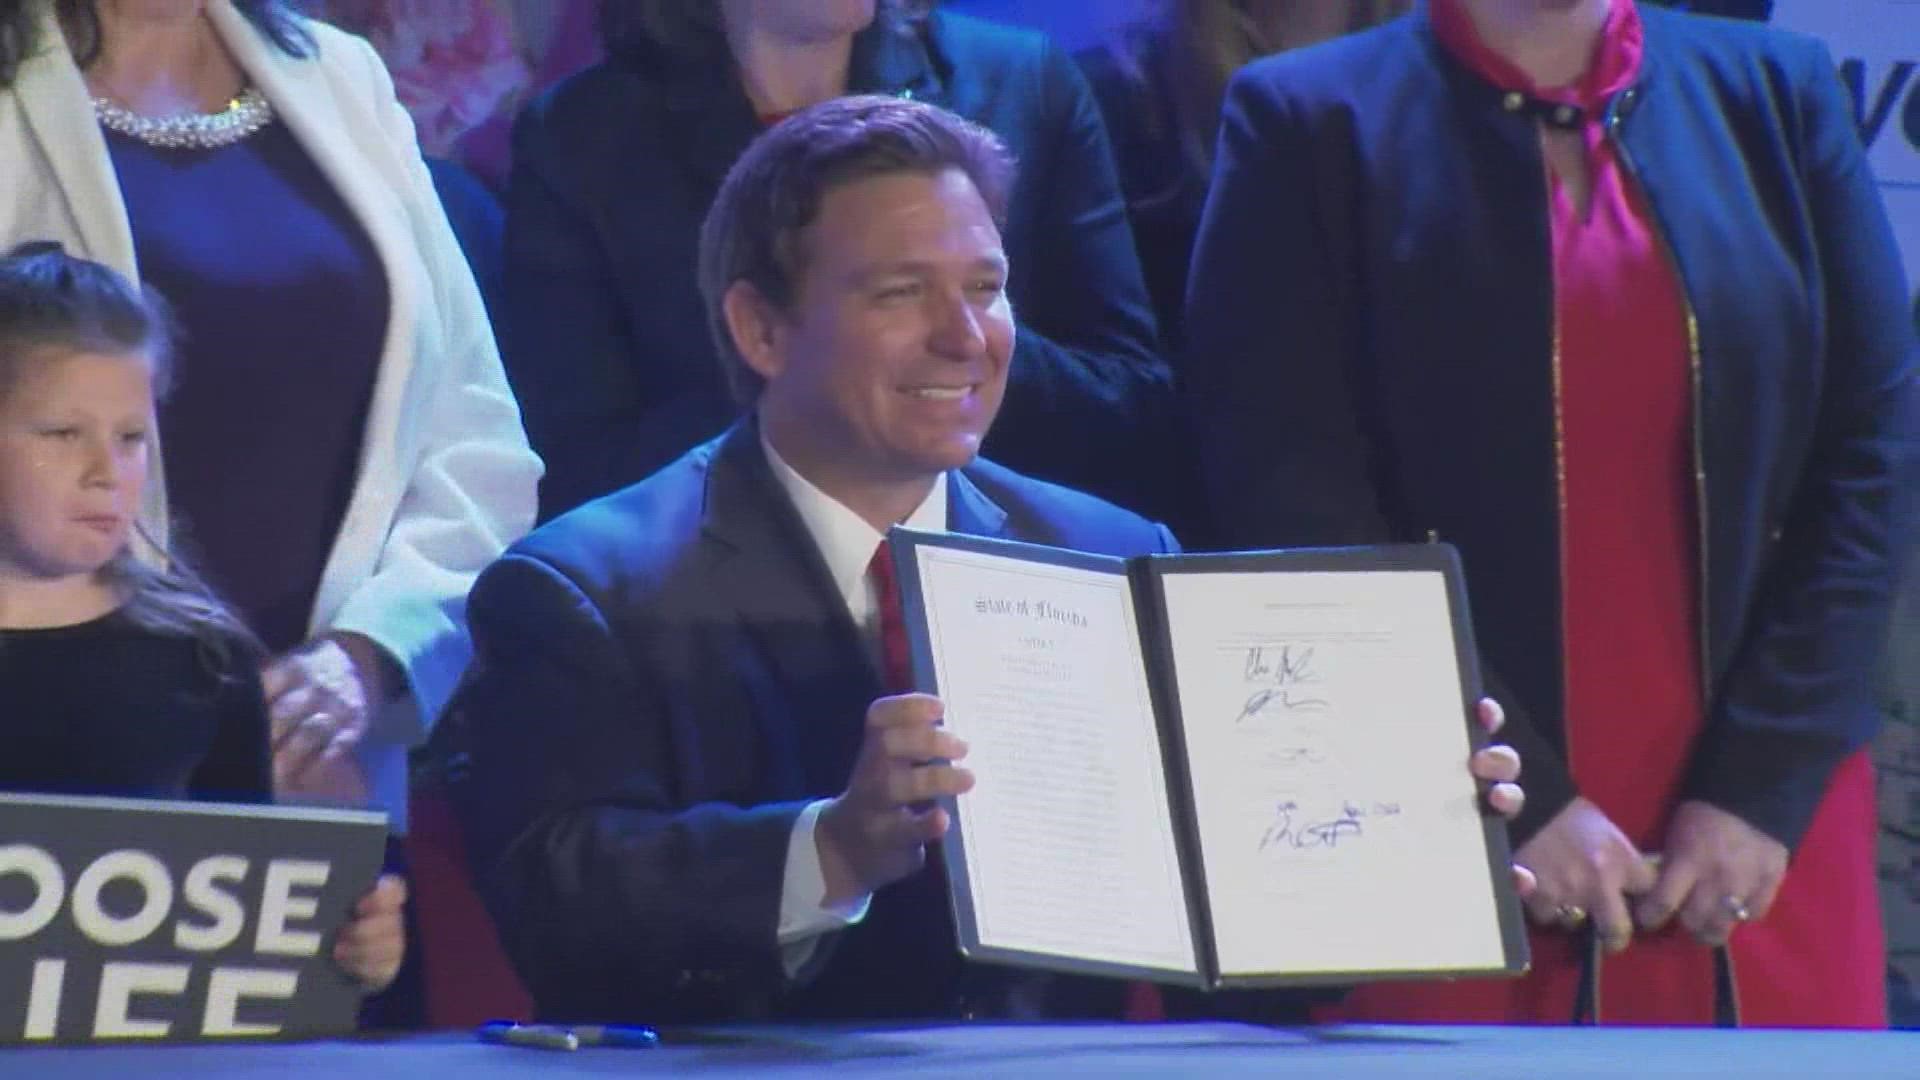 The hotly contested bill banning abortions after 15 weeks in Florida was signed into law by Governor Ron DeSantis Thursday in Kissimmee.